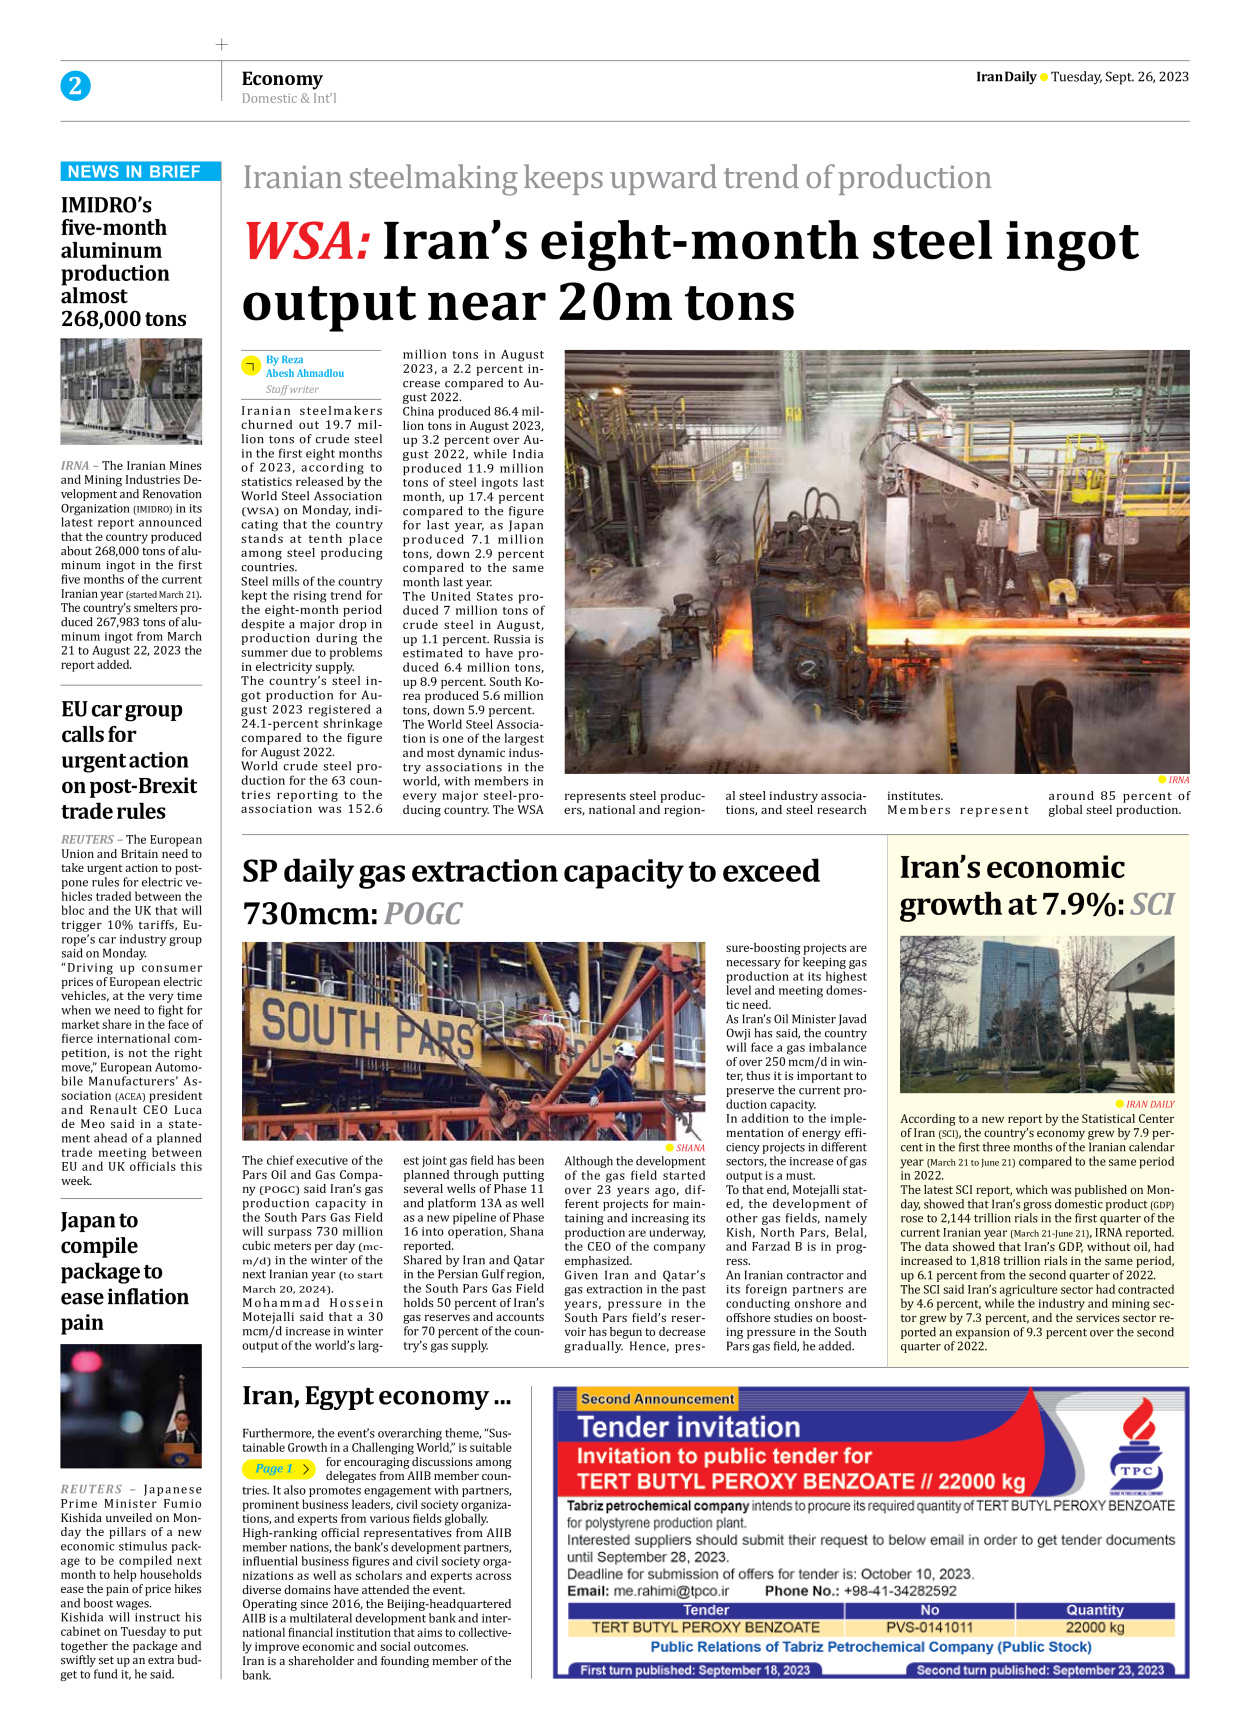 Iran Daily - Number Seven Thousand Three Hundred and Ninety Three - 26 September 2023 - Page 2